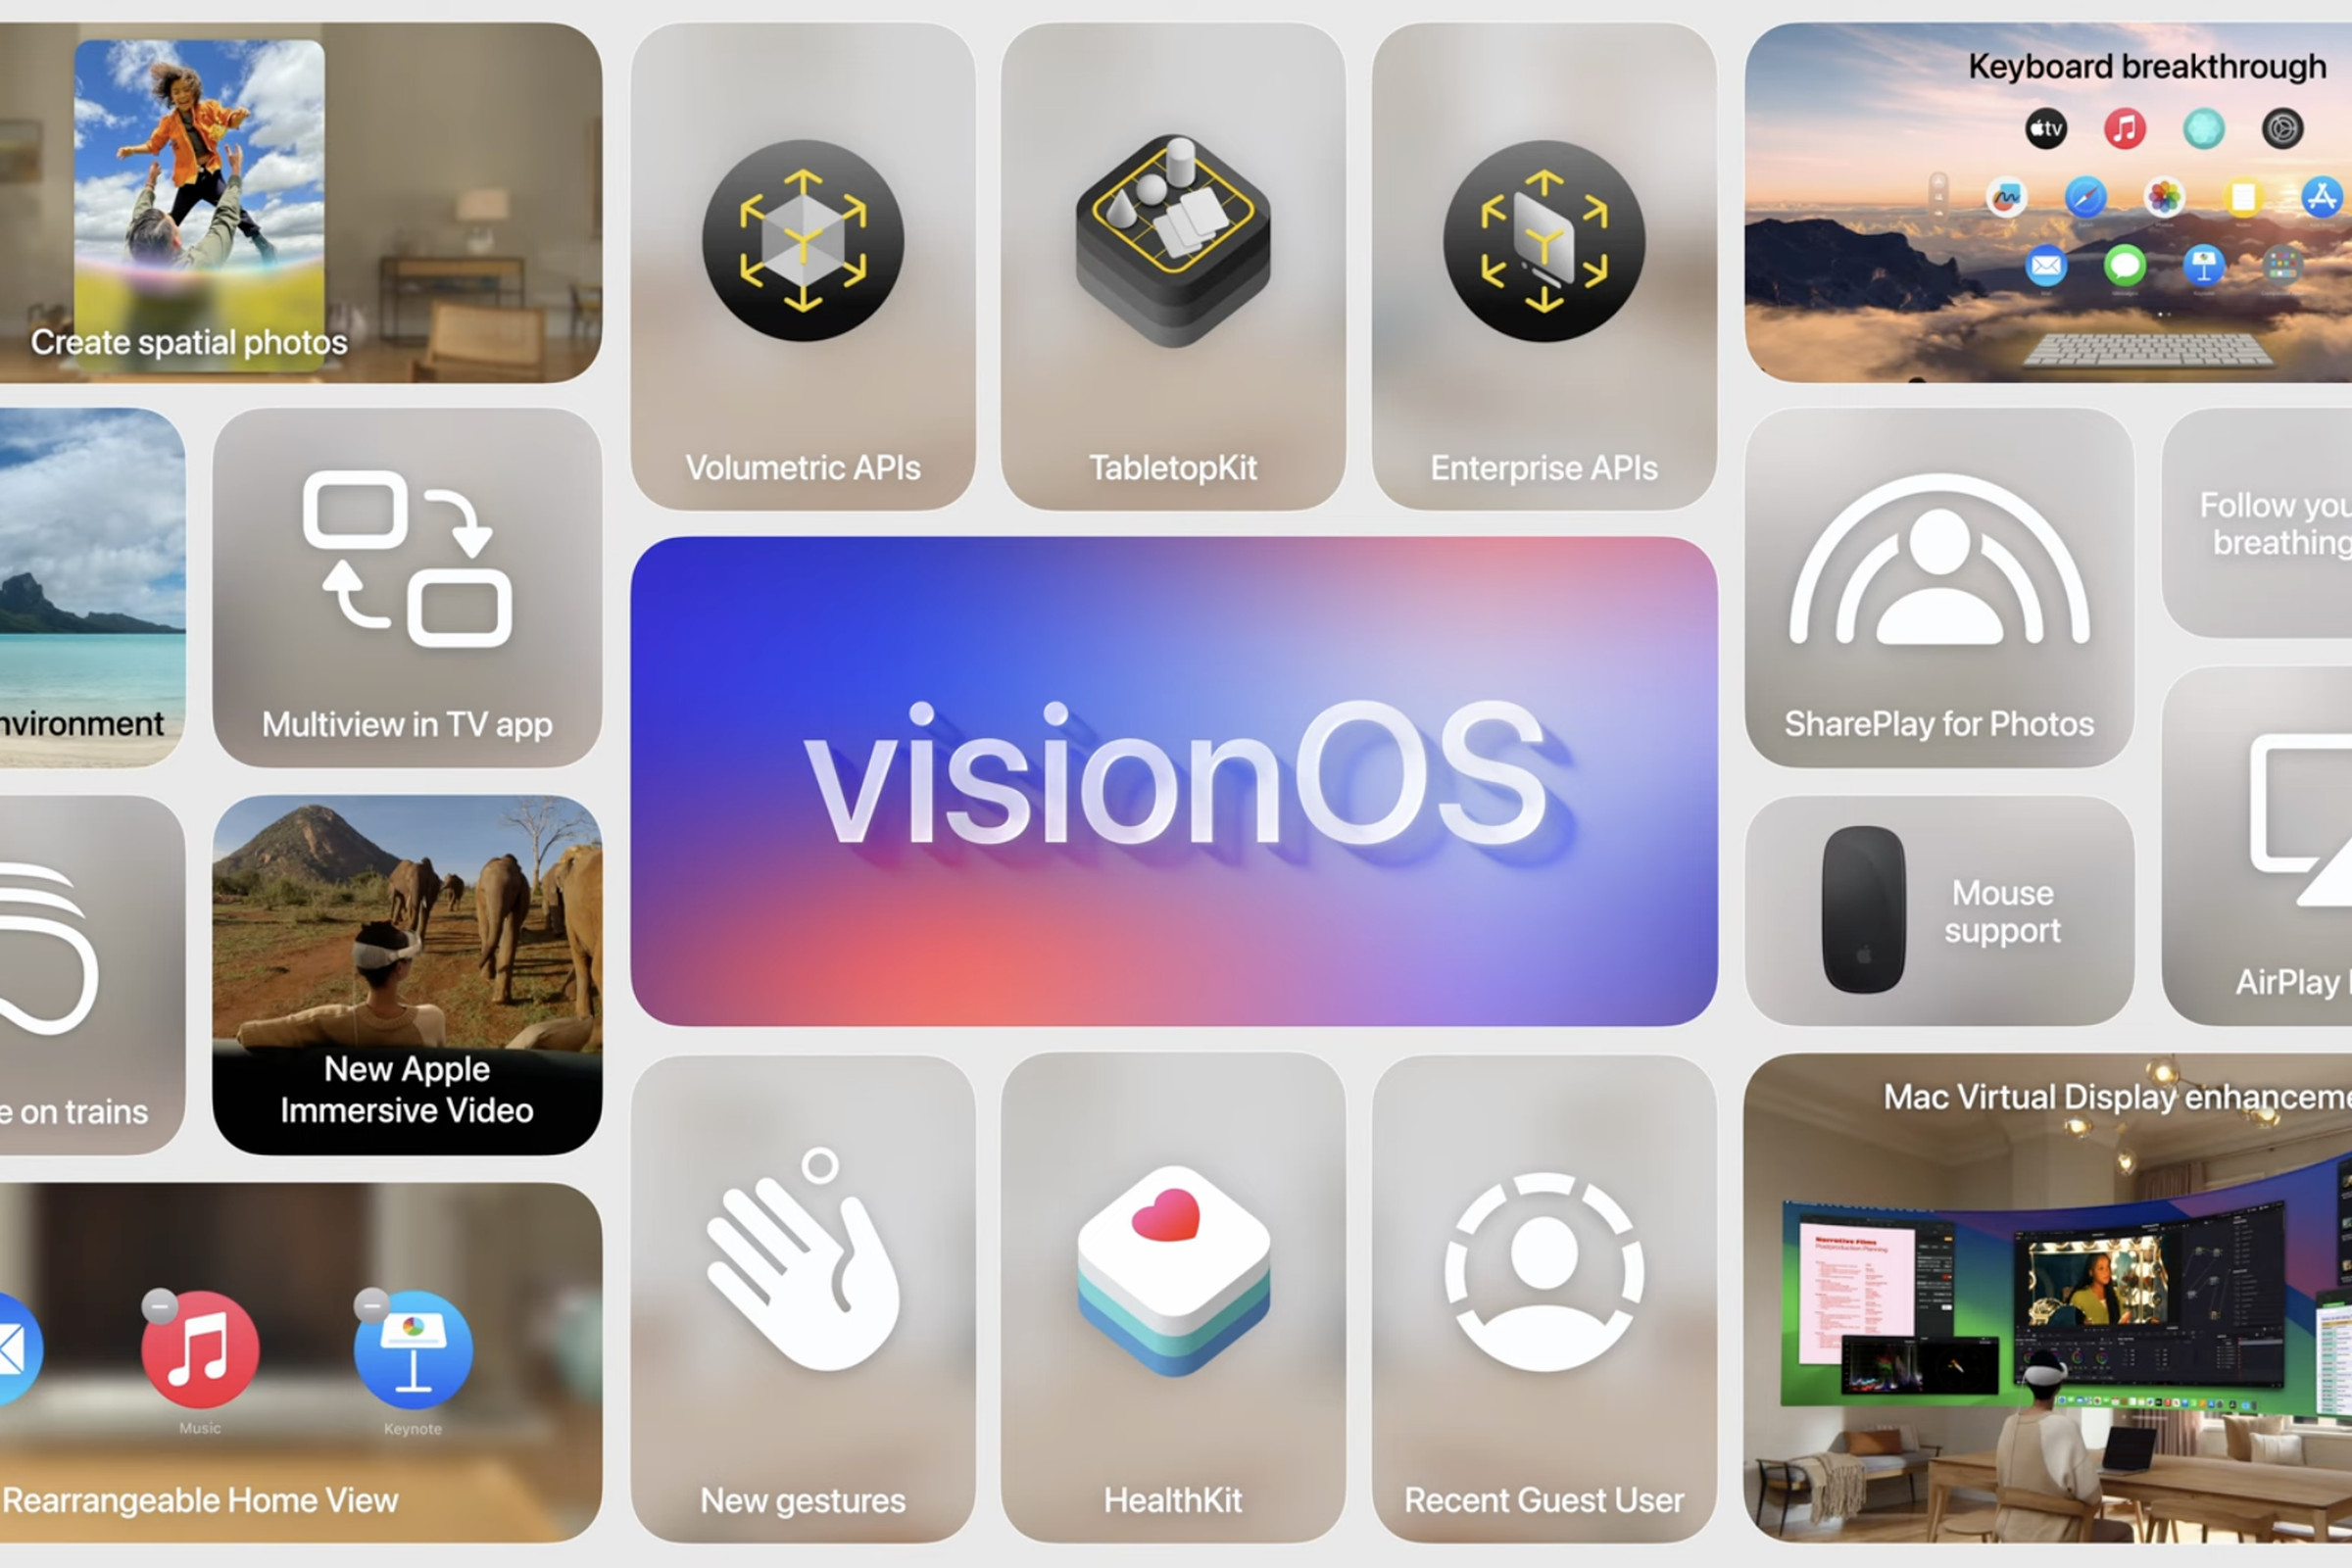 Apple’s “bento box” showing several features coming to visionOS 2.